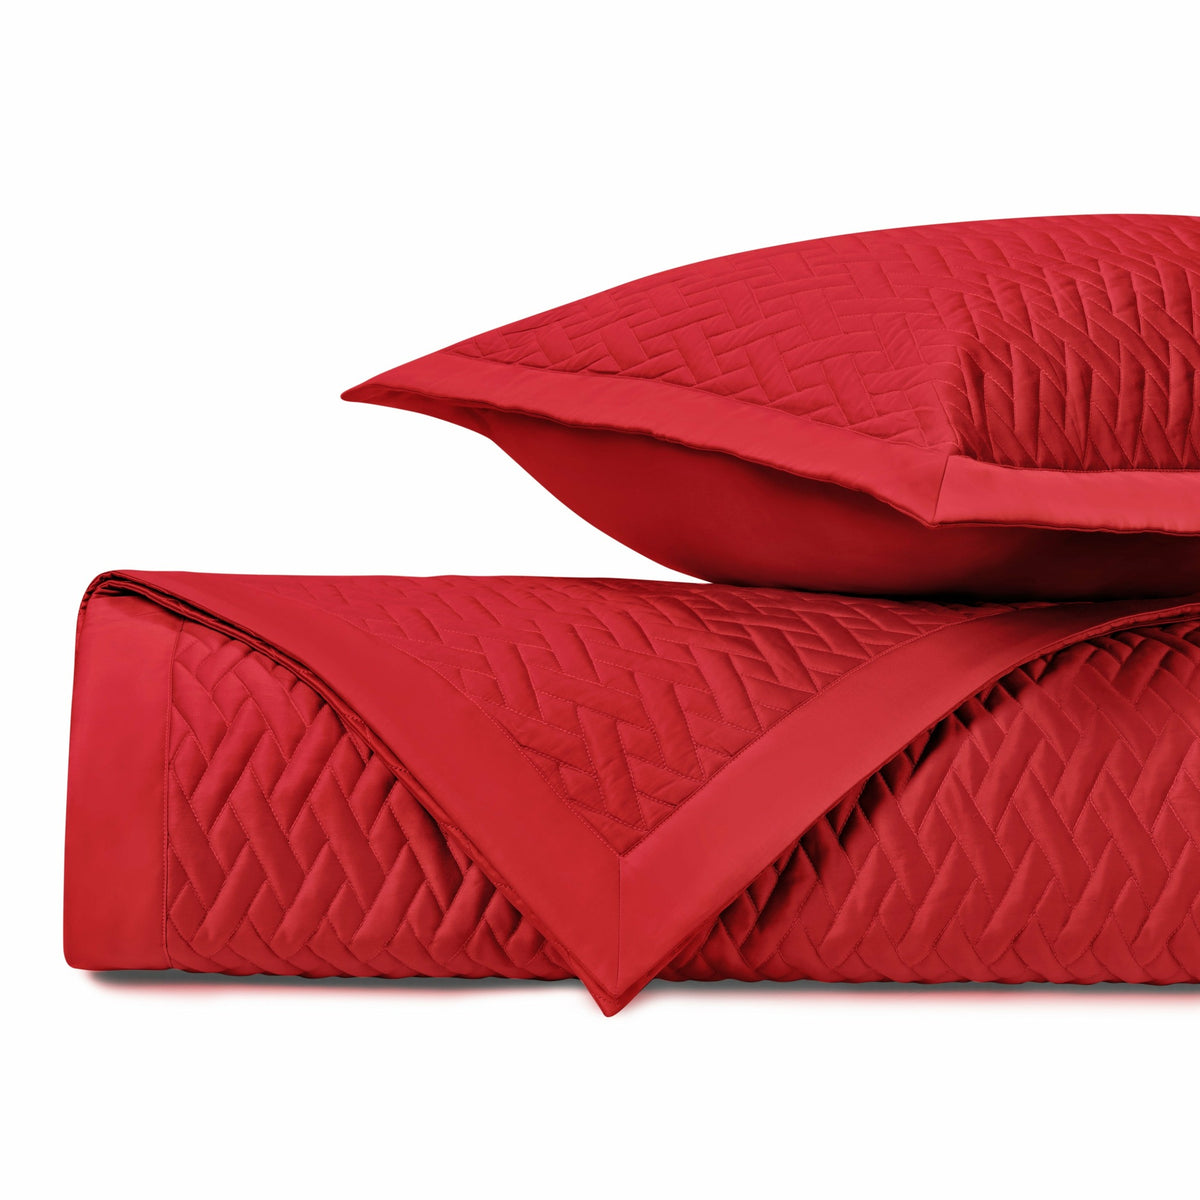 Home Treasures Viscaya Quilted Bedding Bright Red Fine Linens